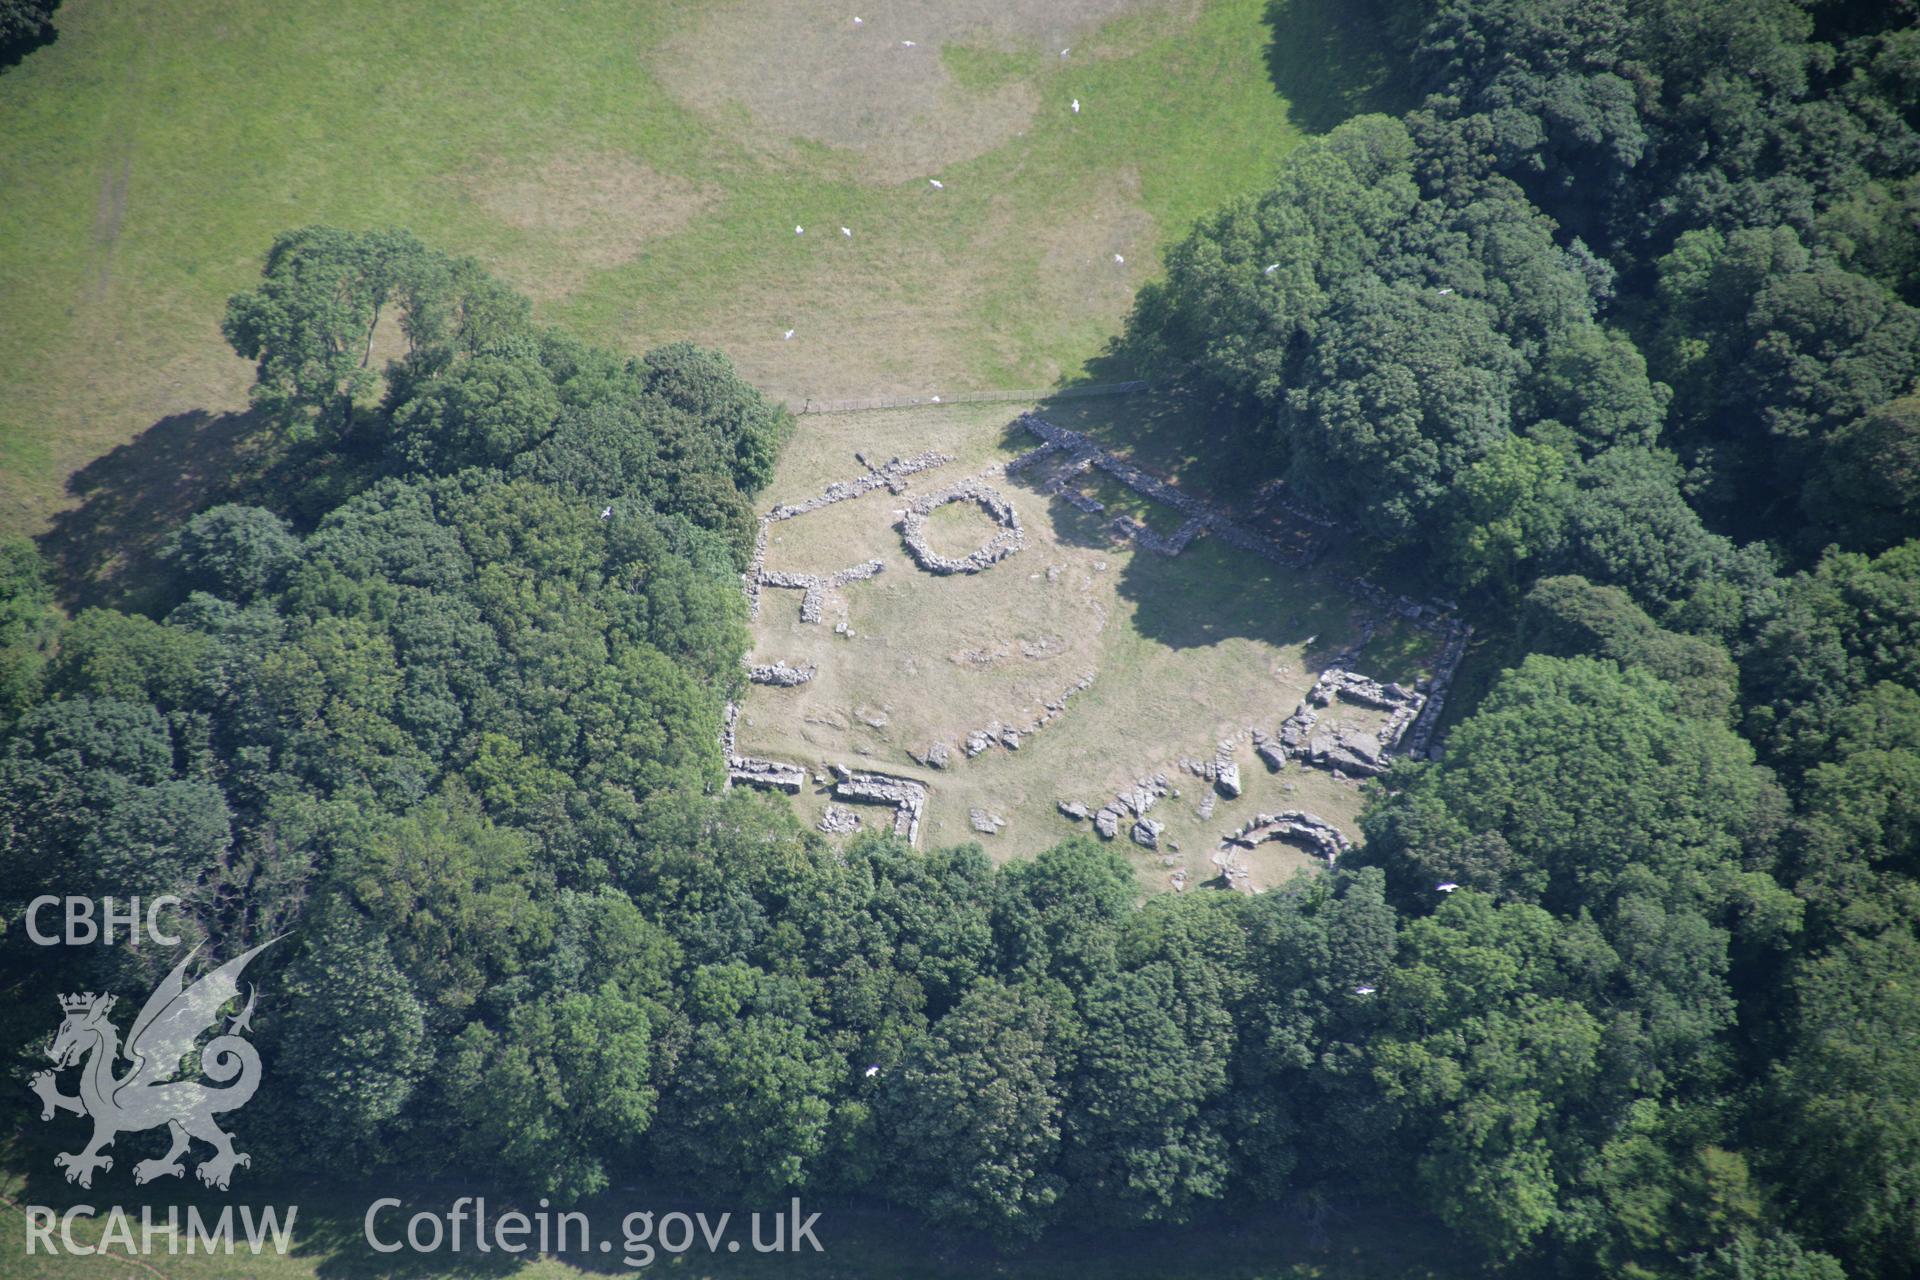 RCAHMW colour oblique aerial photograph of Din Lligwy Settlement, Moelfre. Taken on 14 August 2006 by Toby Driver.